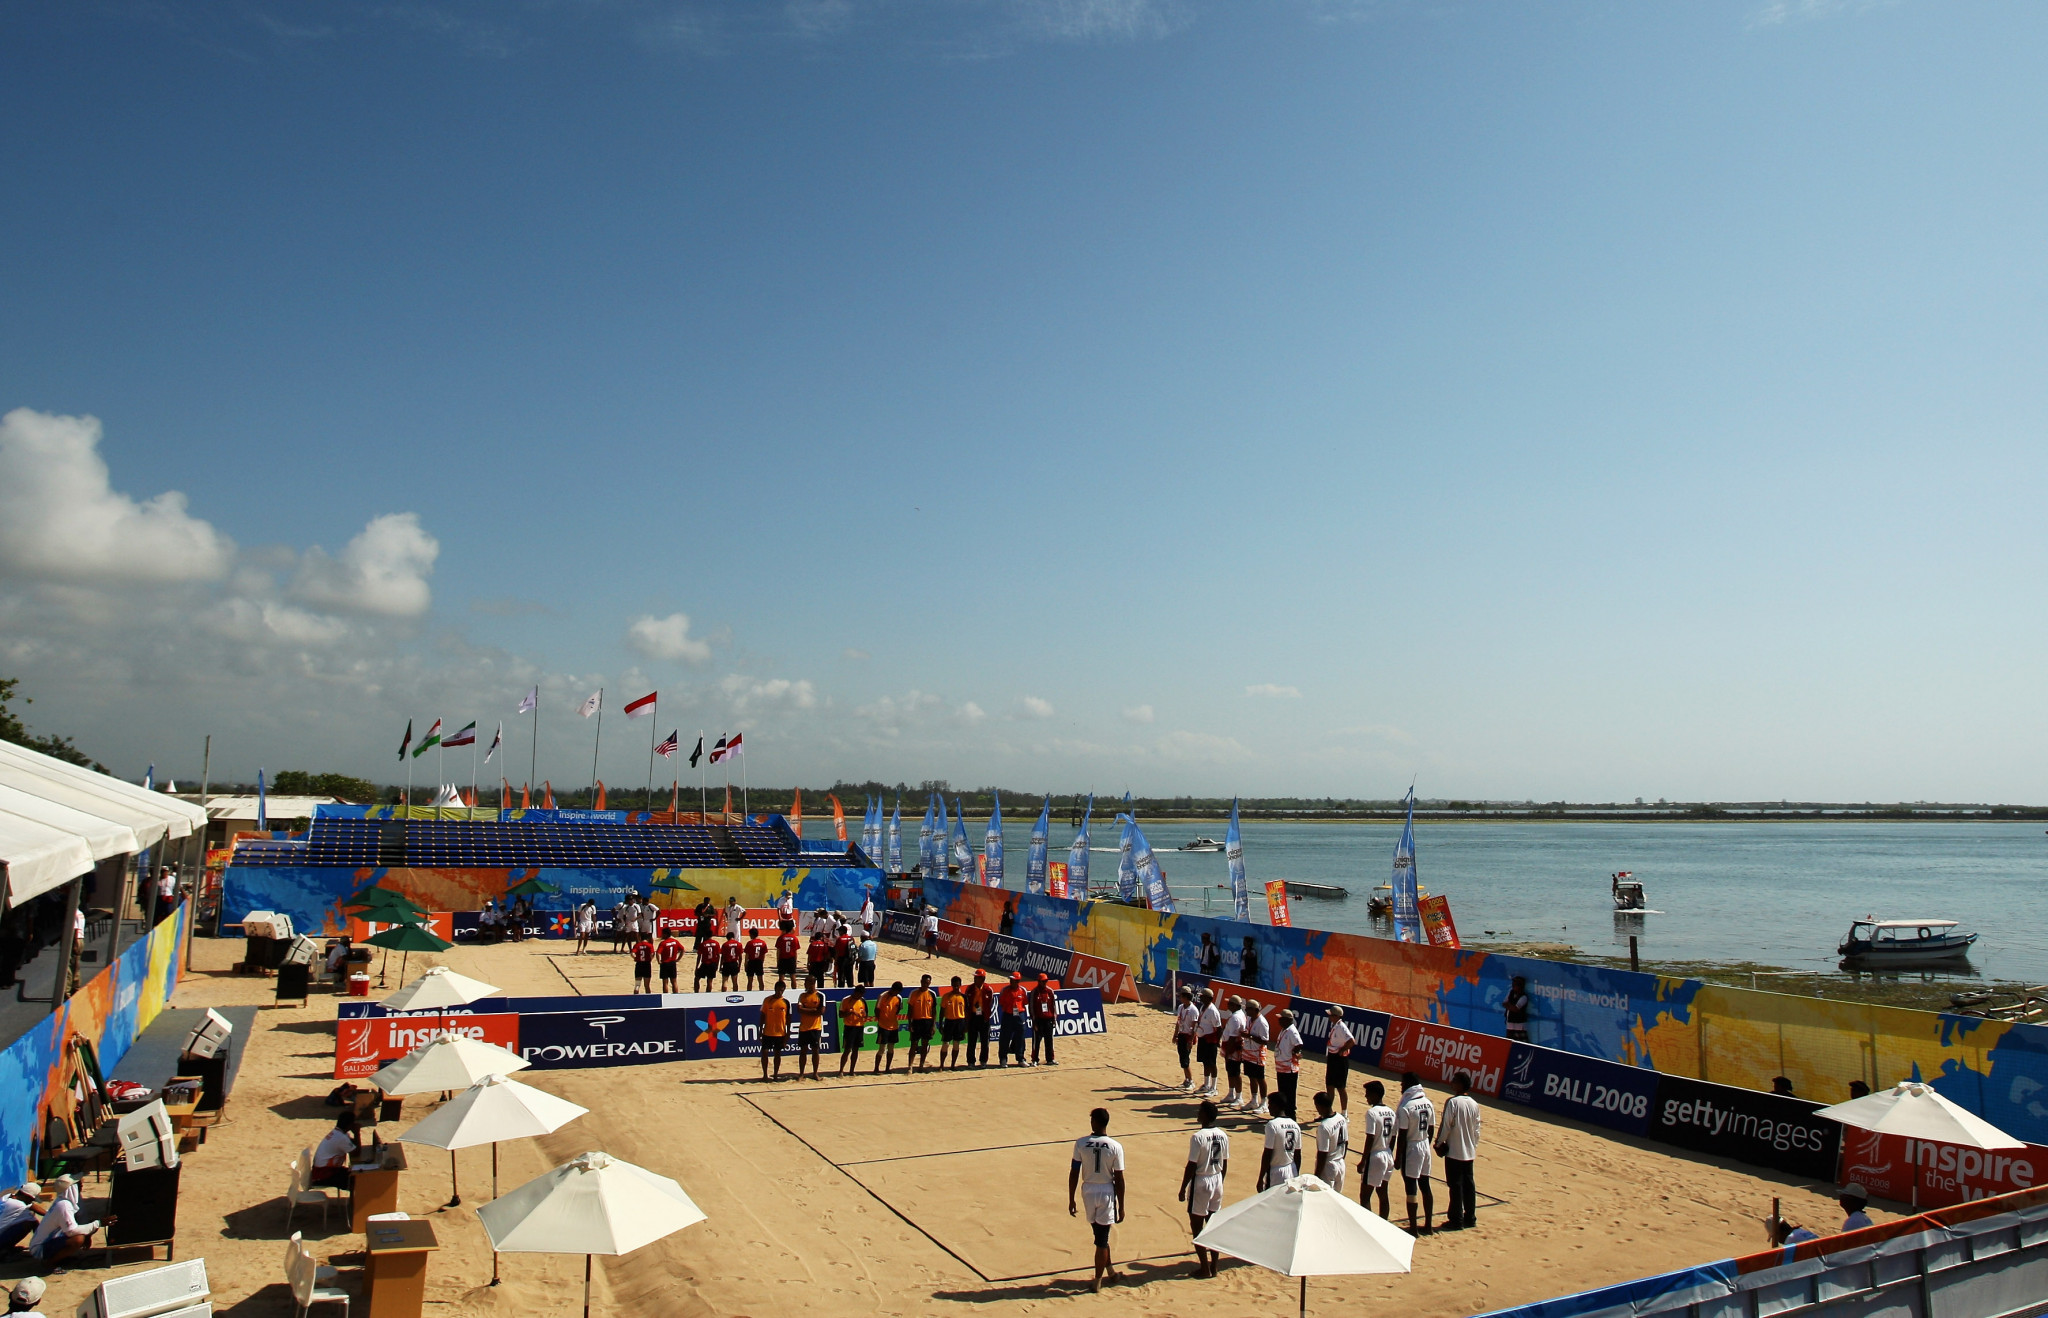 Bali staged the first Asian Beach Games in 2008 ©Getty Images